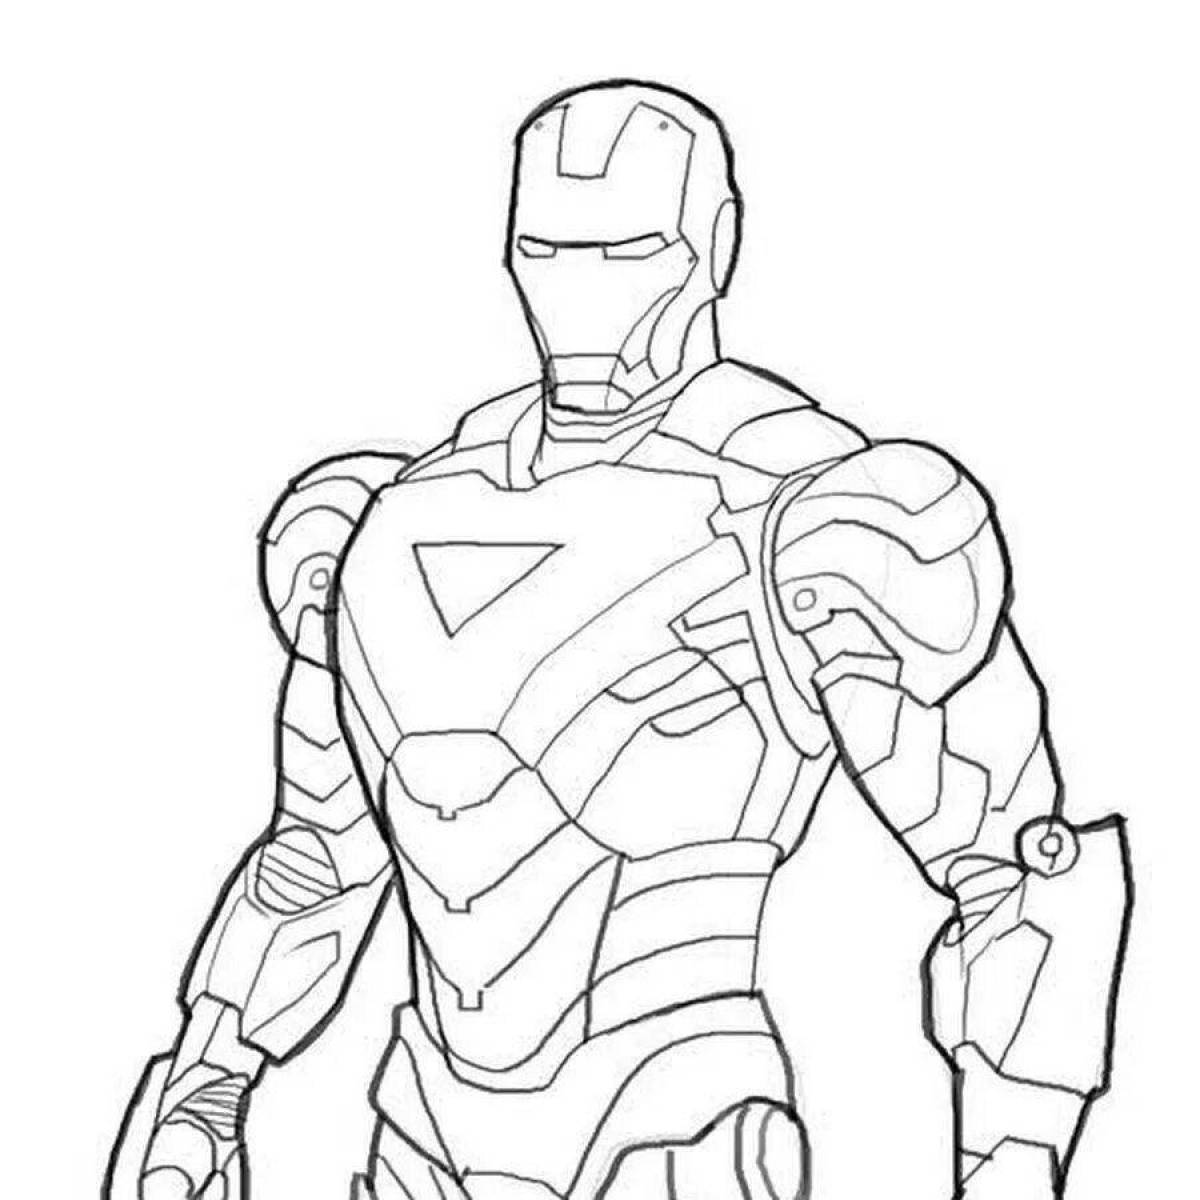 Excellent coloring iron man mark 85